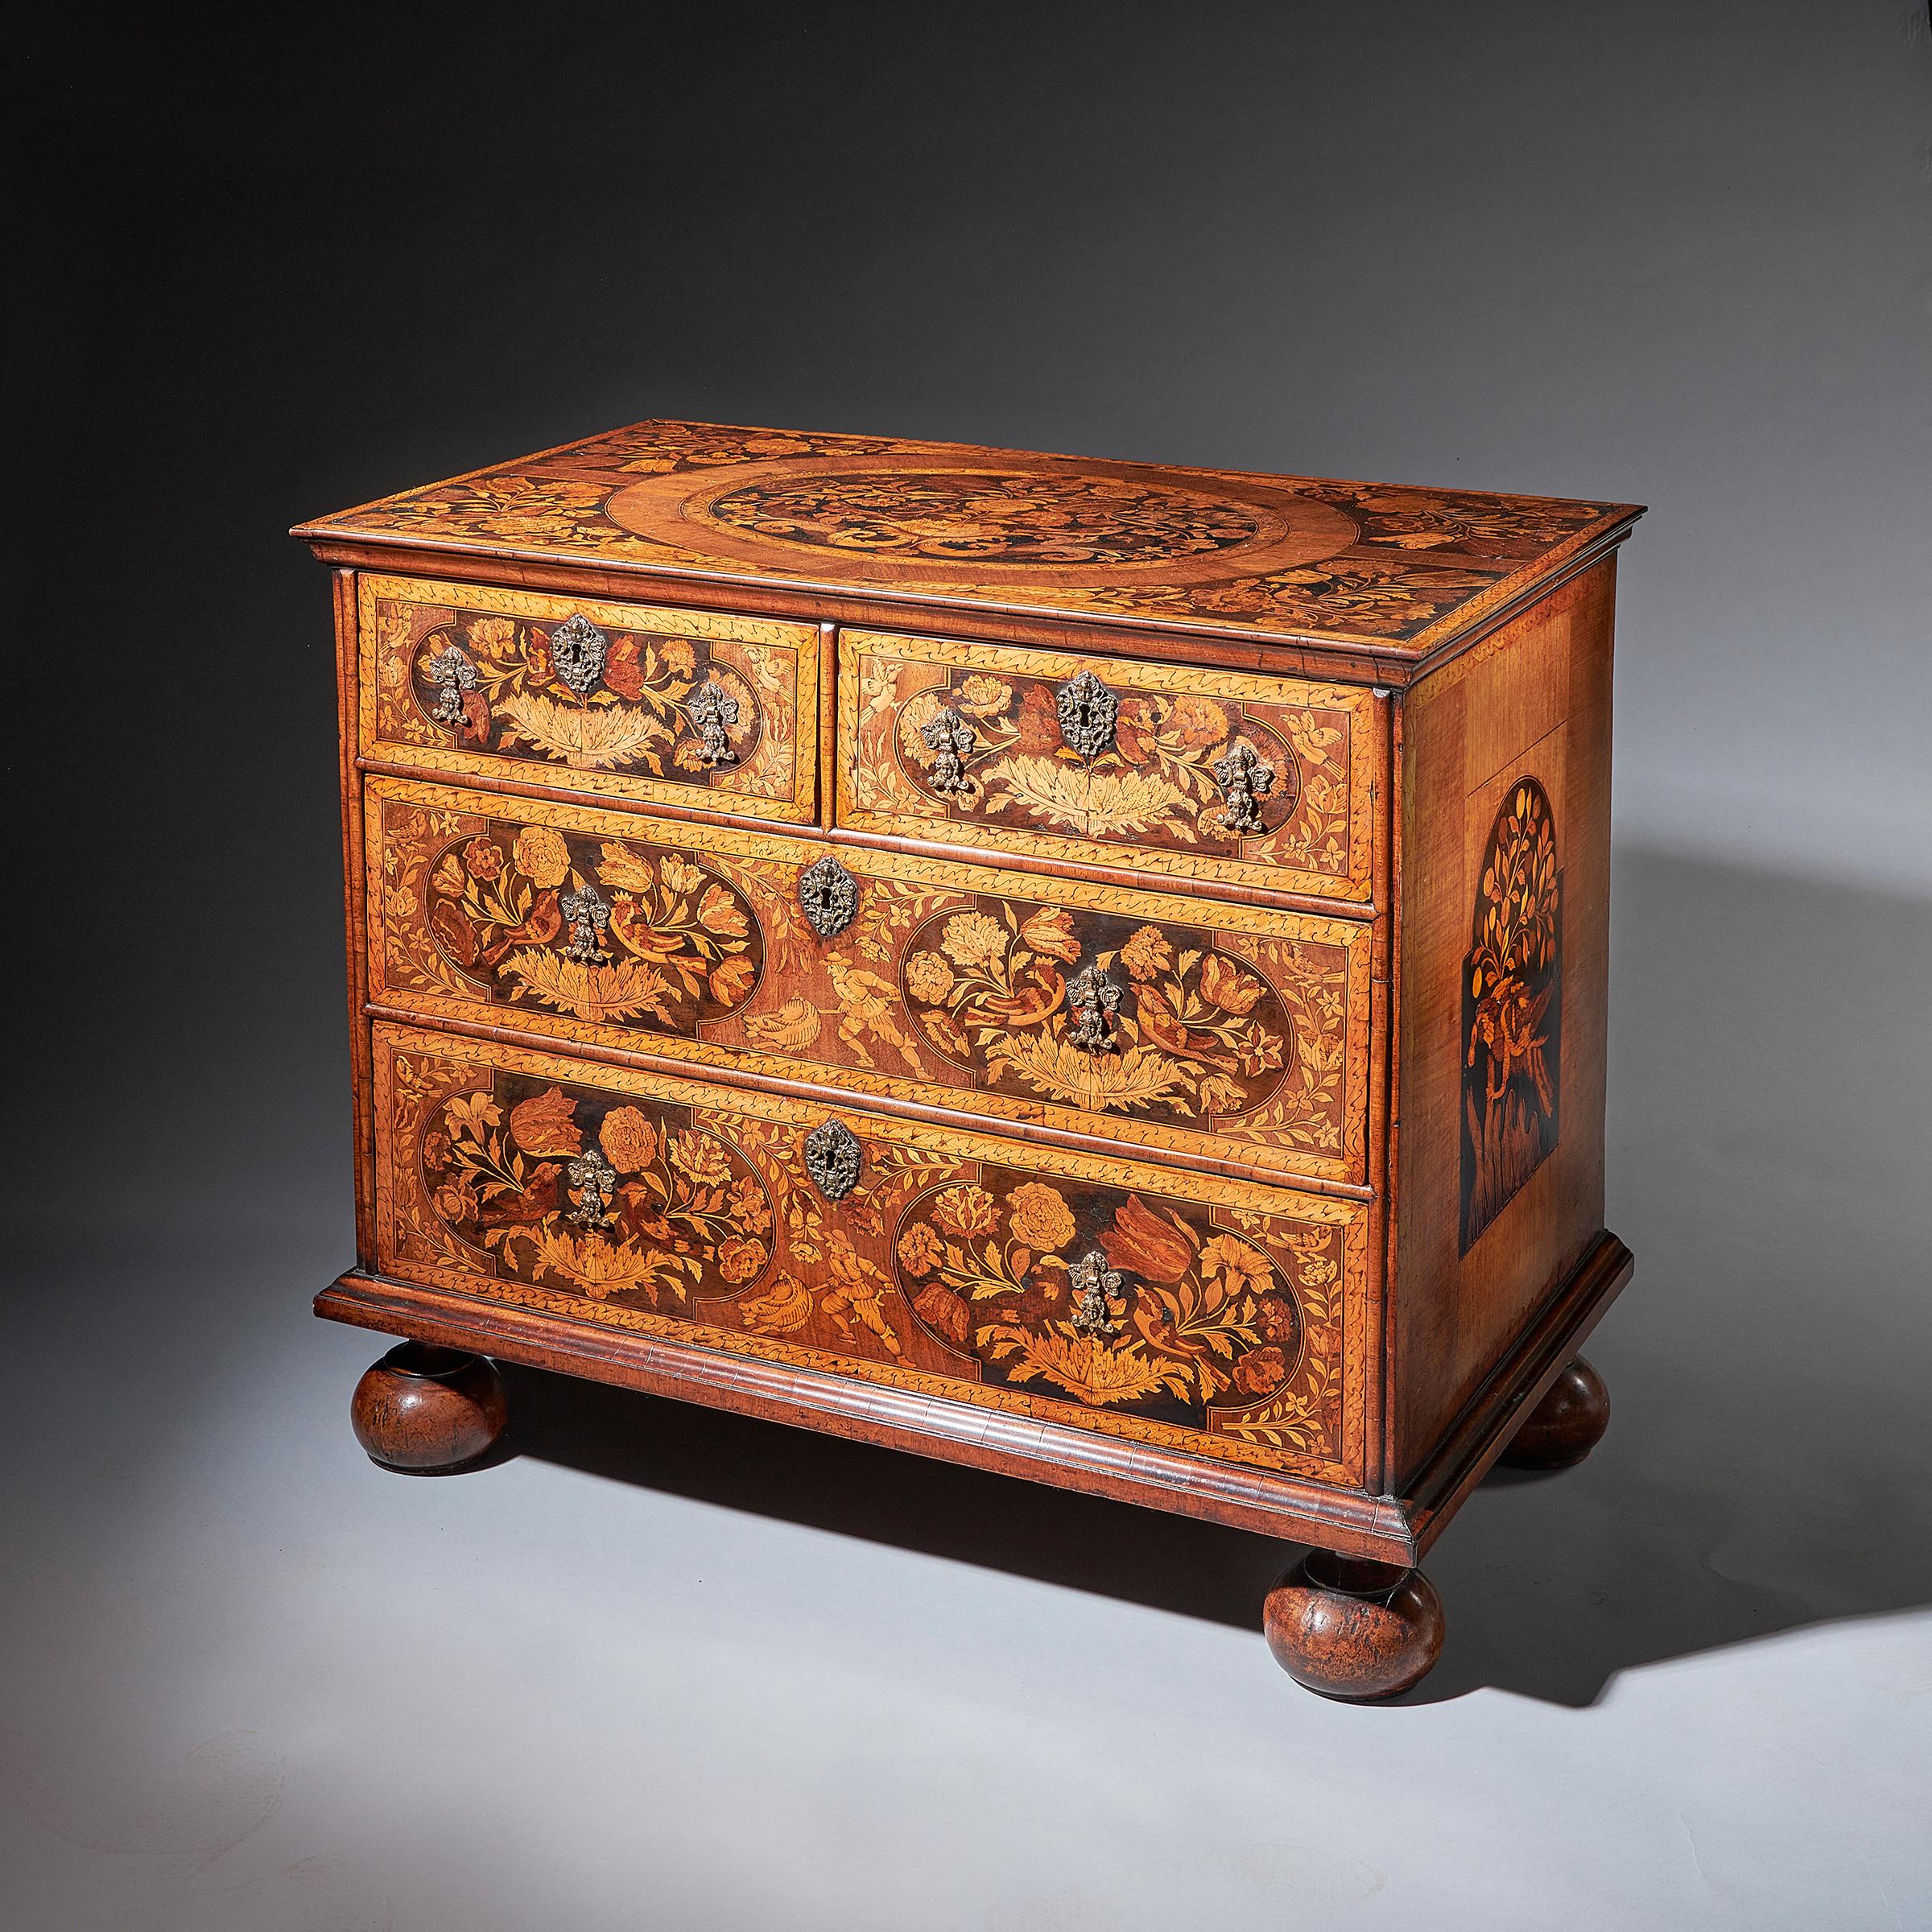 A William and Mary walnut floral marquetry chest, circa 1690.

The rectangular ogee moulded top with central banded oval inlaid with spring flowers, birds and scrolls of acanthus, on ebony ground. The two short and two long graduating drawers are